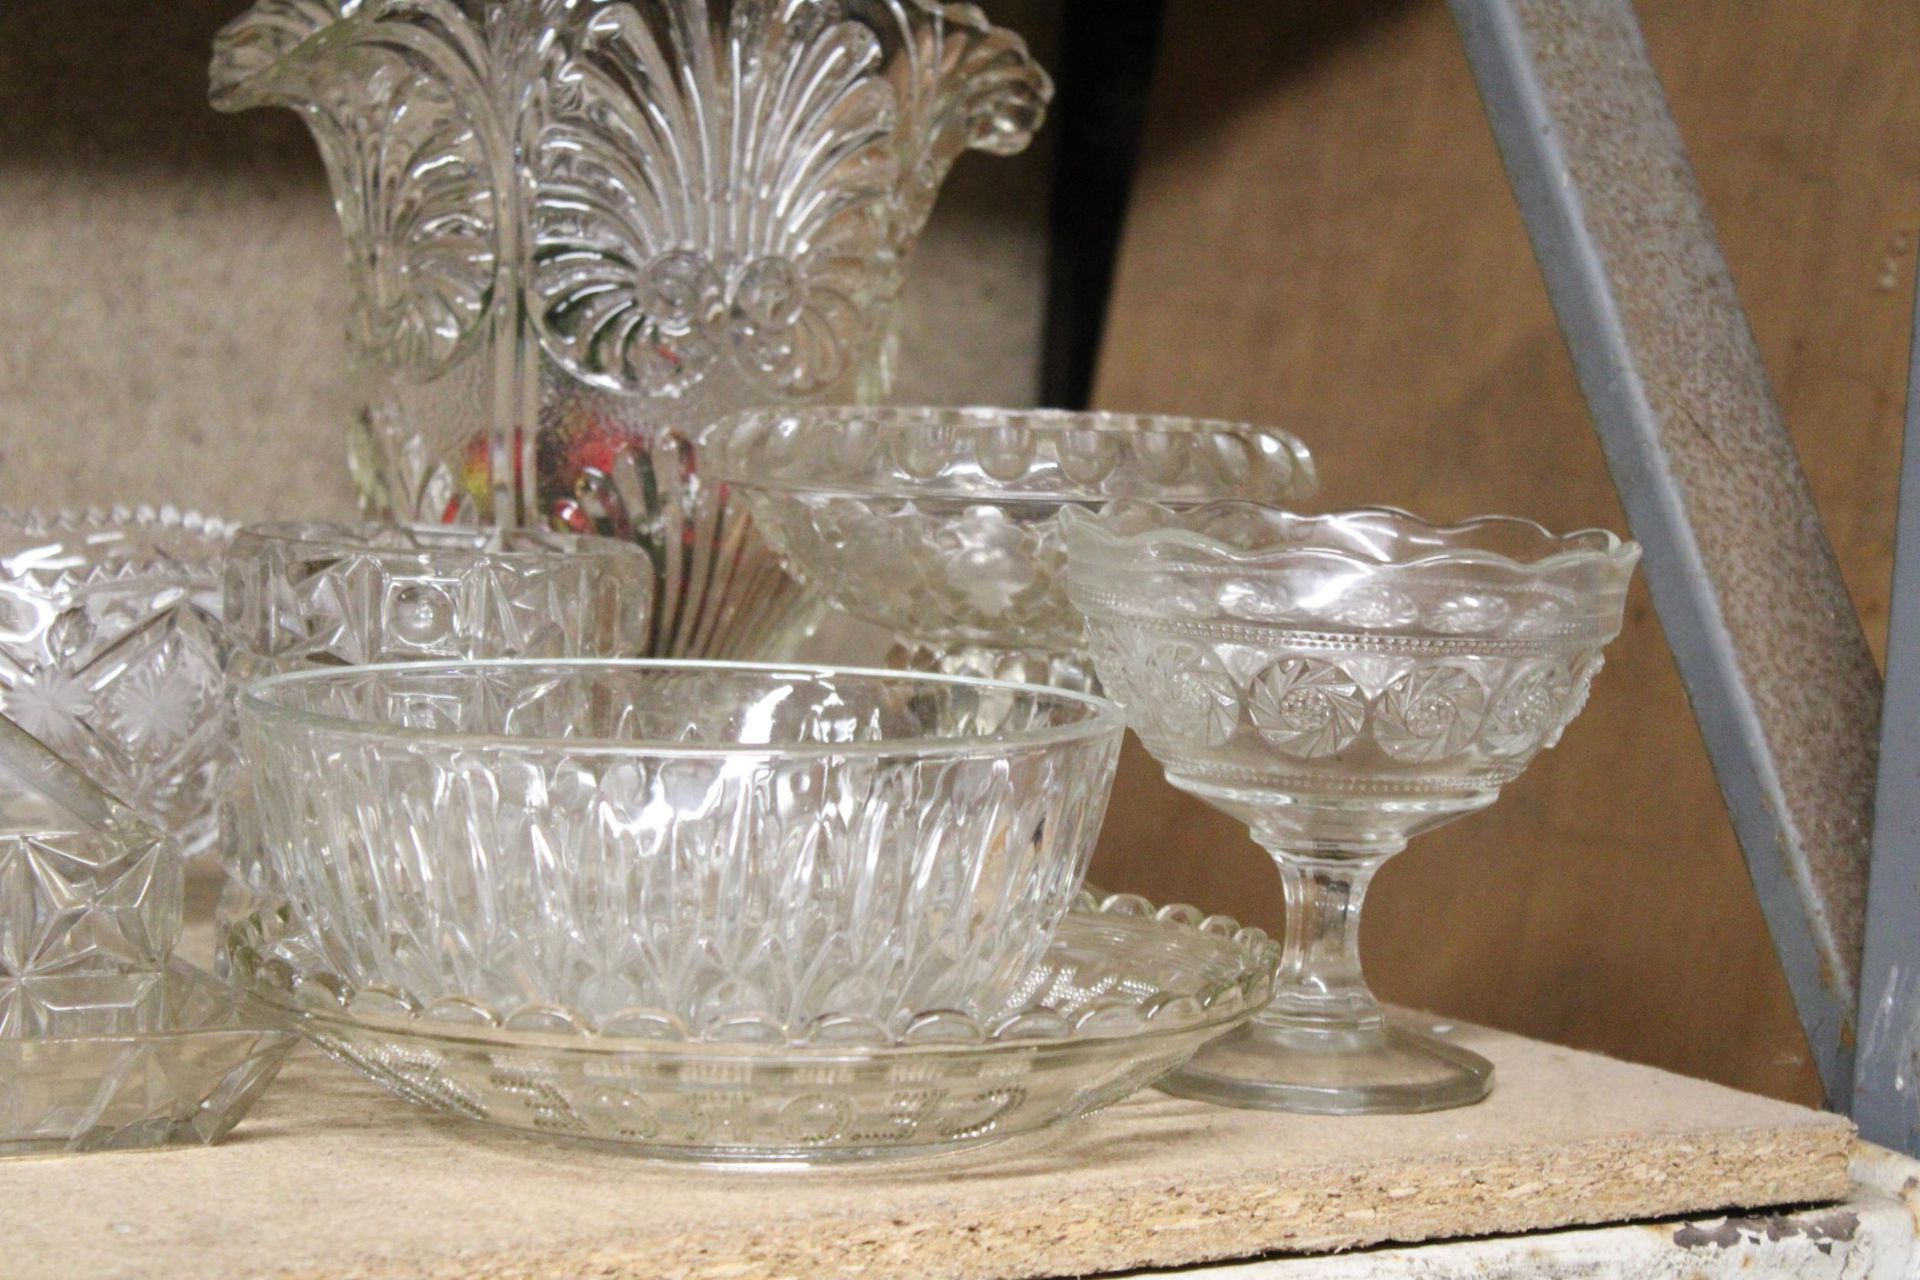 A QUANTITY OF GLASSWARE TO INCLUDE A LARGE VASE, BOWLS, FOOTED BOWLS, A CHEESE DISH, ETC - Image 3 of 4